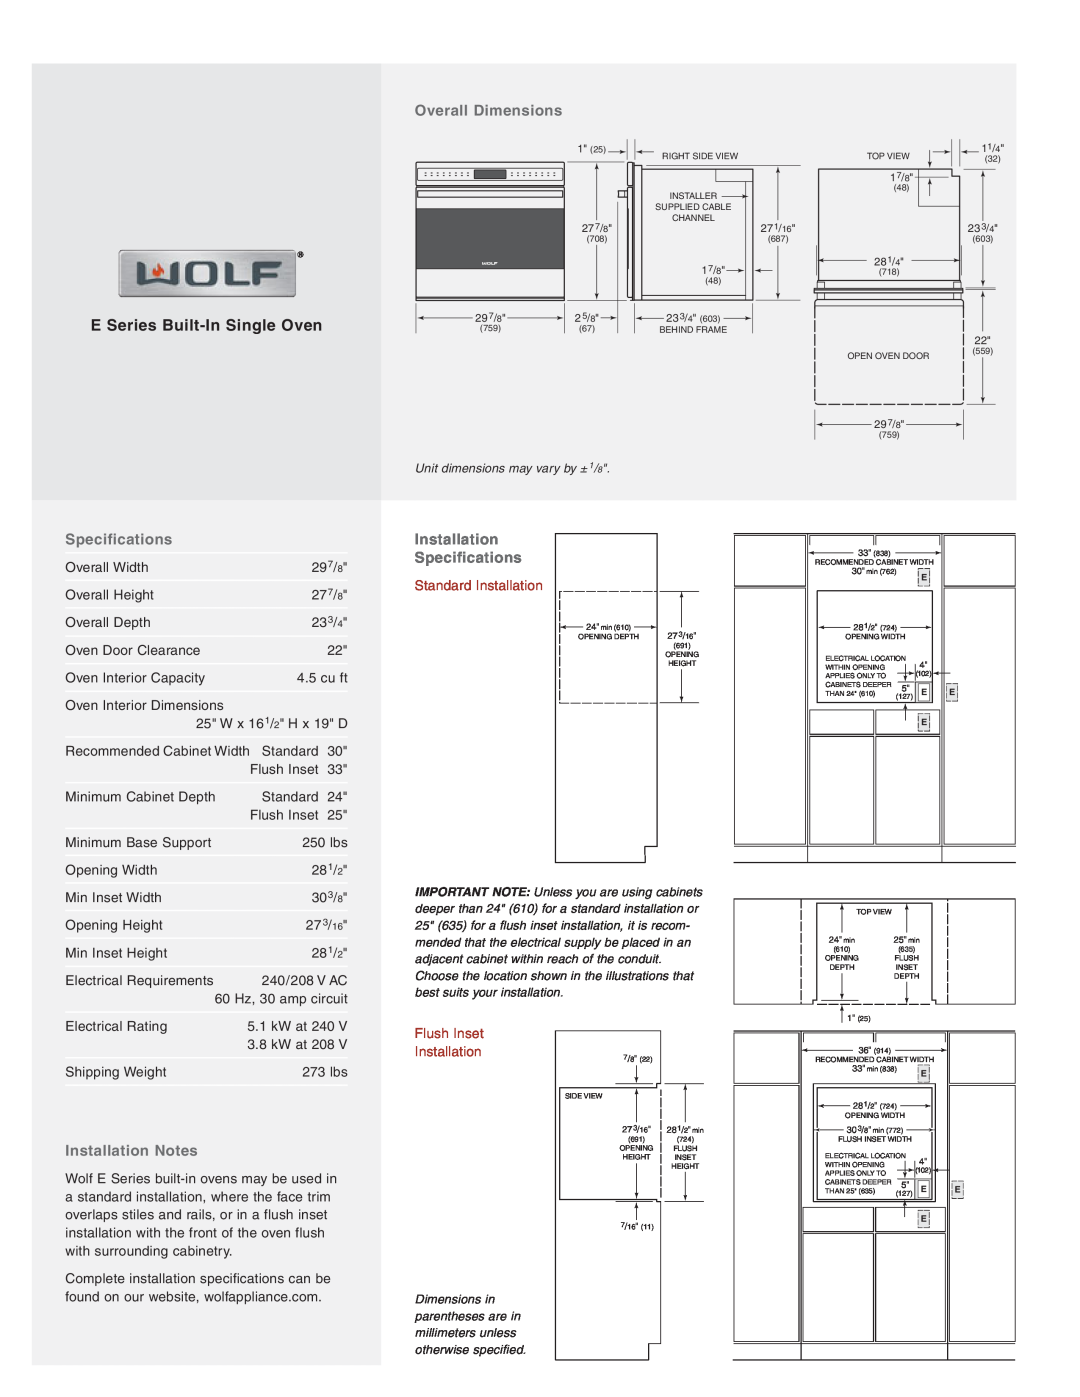 Wolf Appliance Company SO30-2U/S E Series Built-In Single Oven, Overall Dimensions, Specifications, Installation Notes 